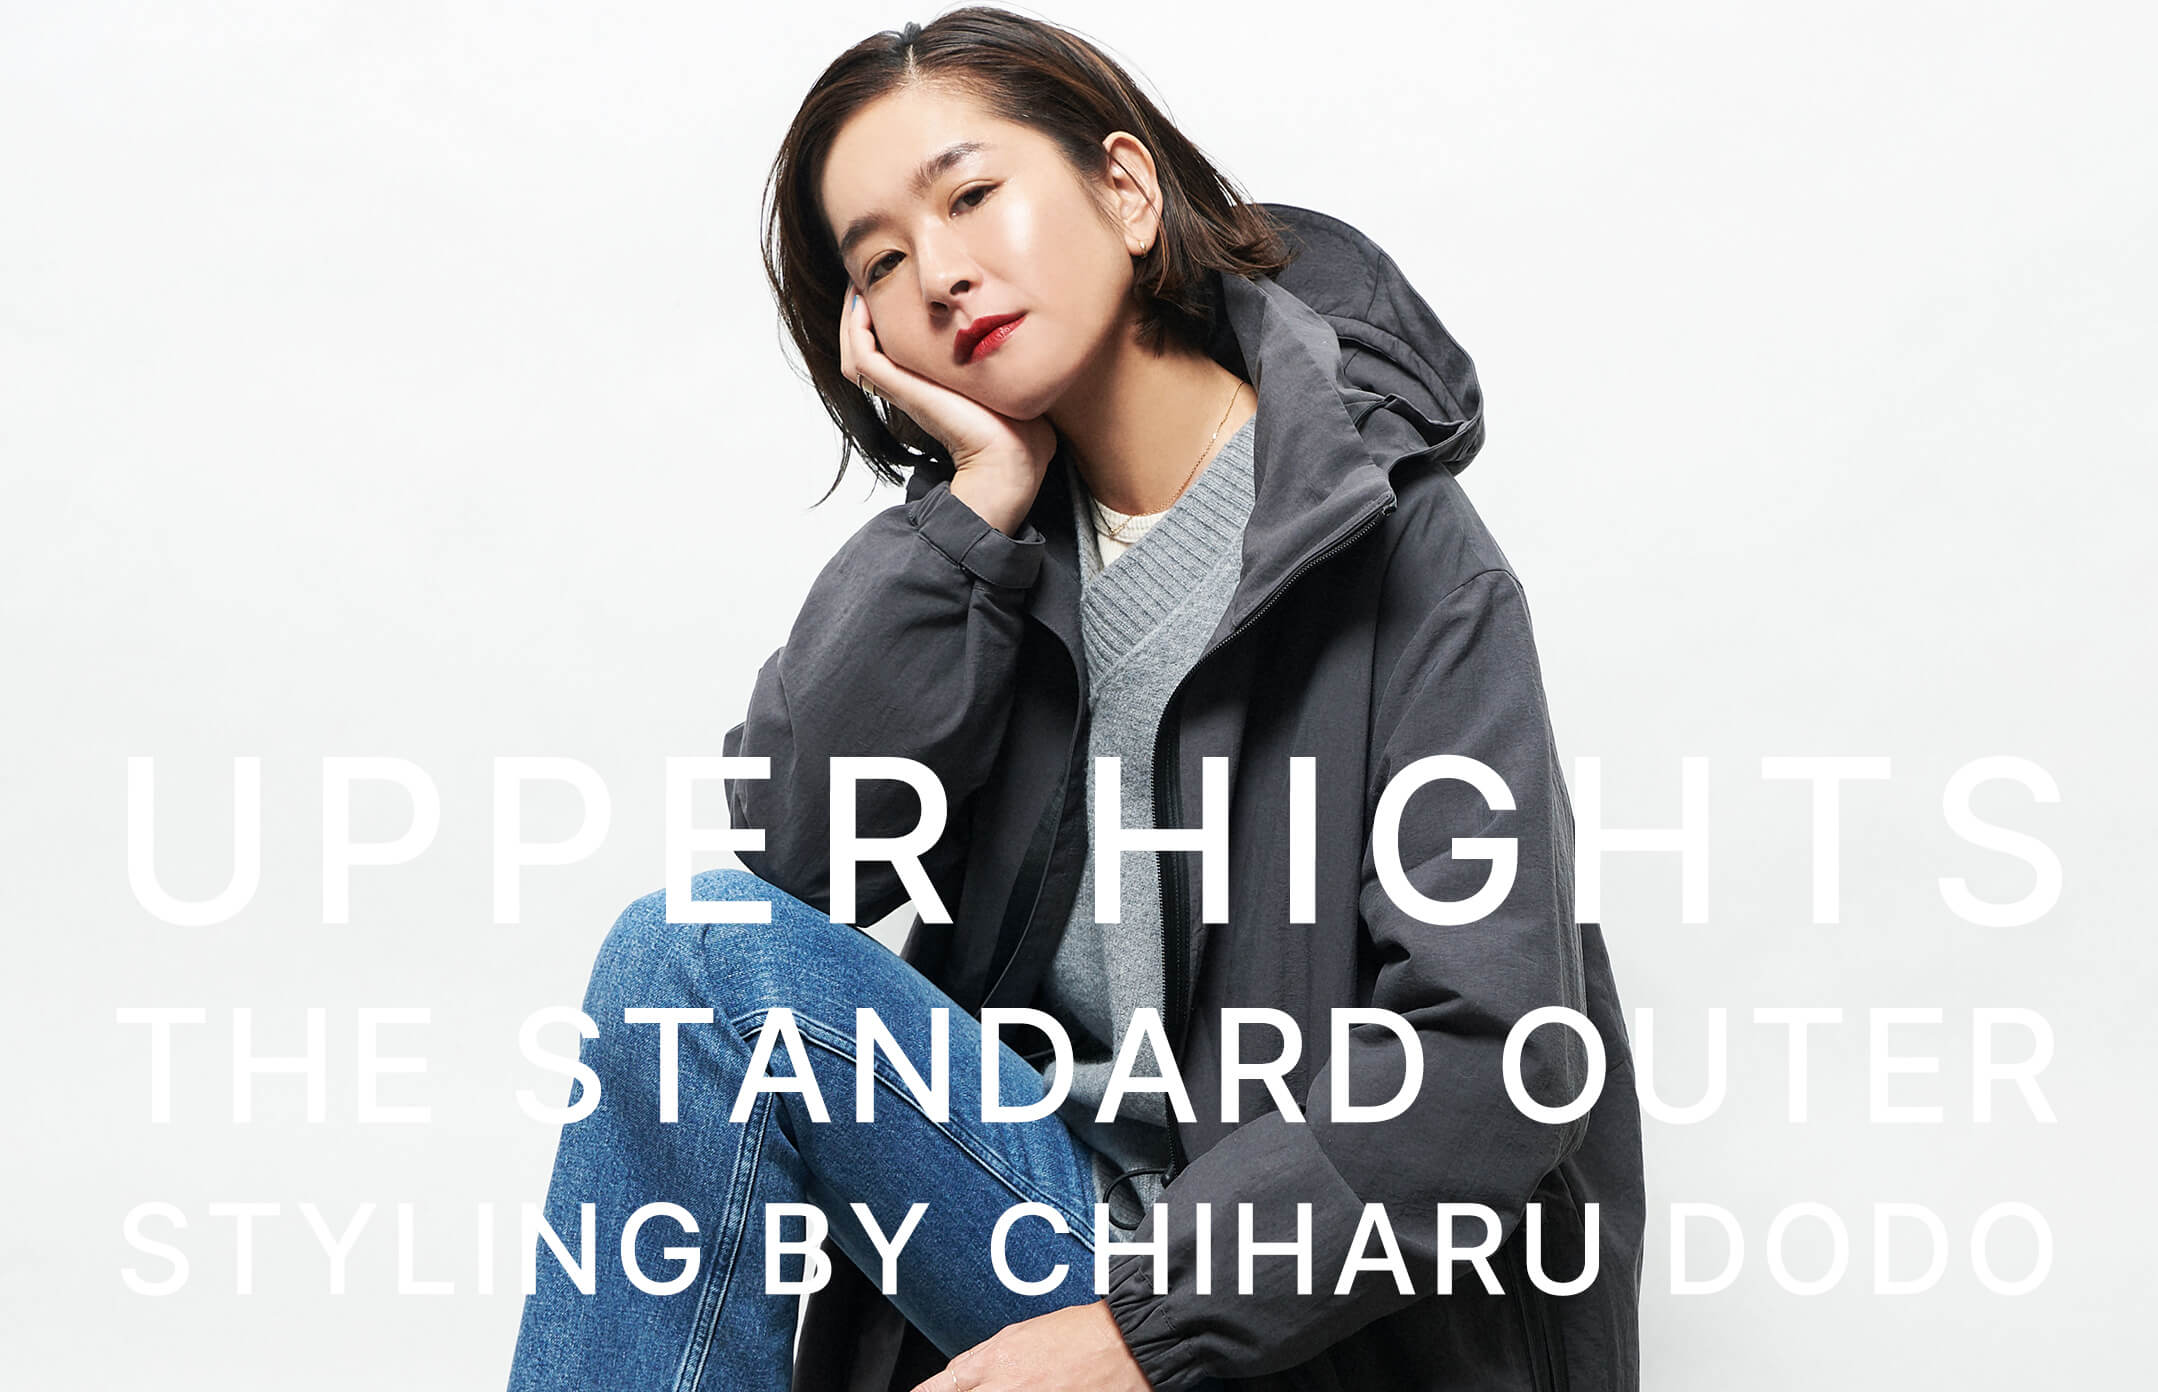 UPPER HIGHTS THE STANDARD OUTER STYLING BY CHIHARU DODO